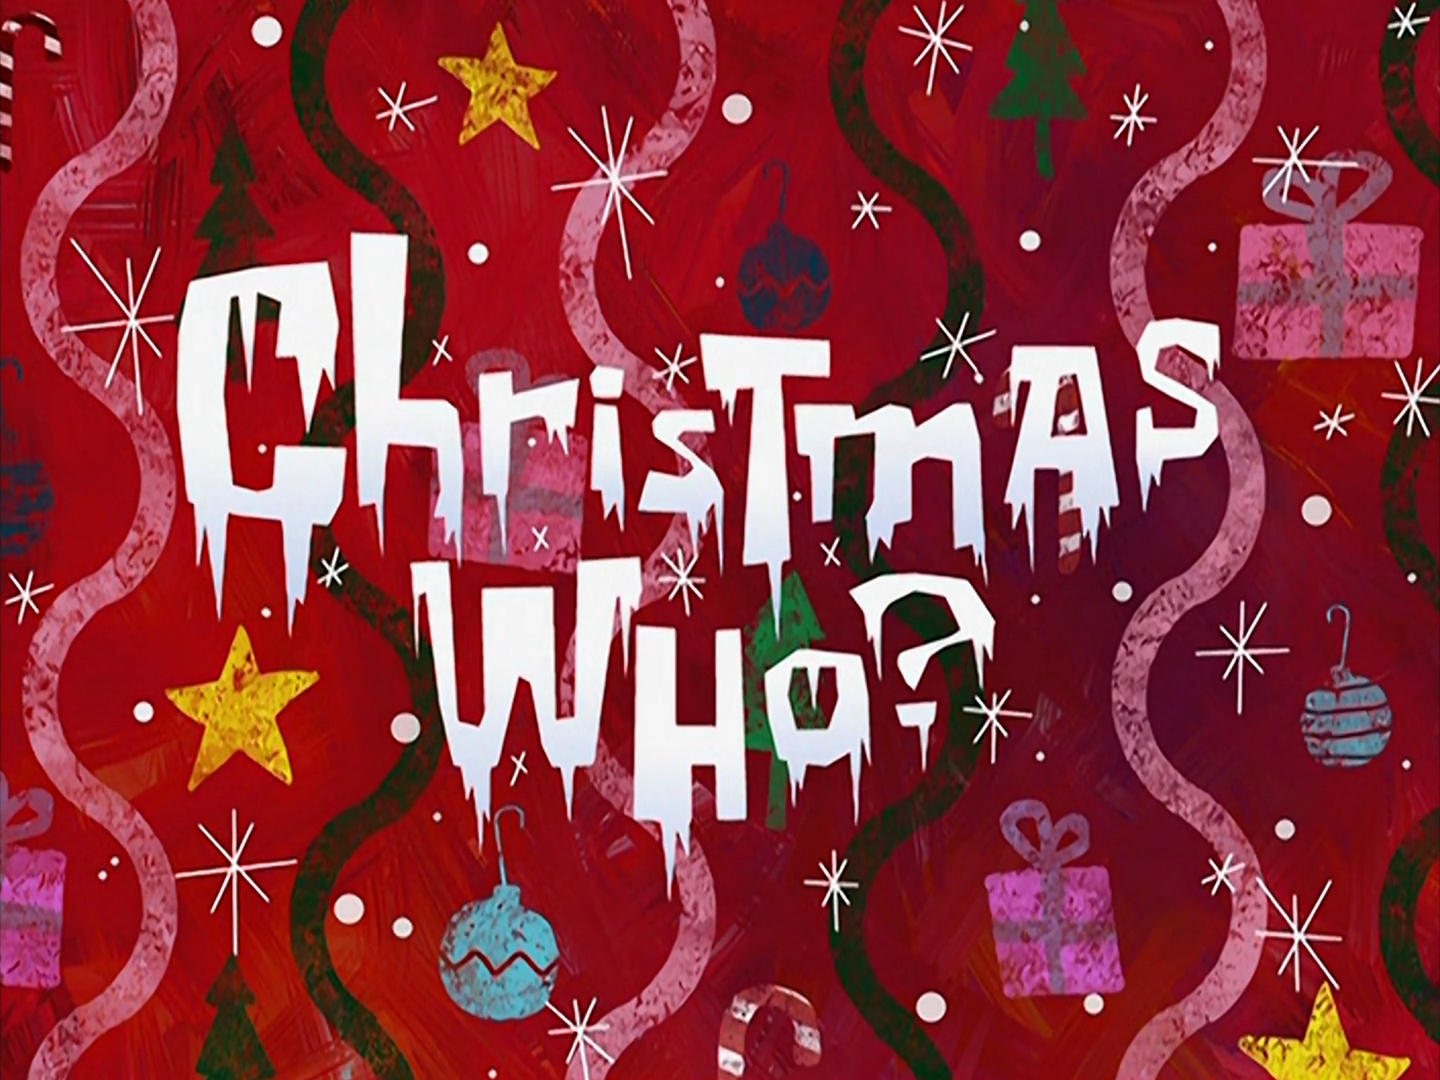 https://static.wikia.nocookie.net/spongebob/images/7/76/Christmas_Who%3F_title_card.png/revision/latest?cb=20230308091956